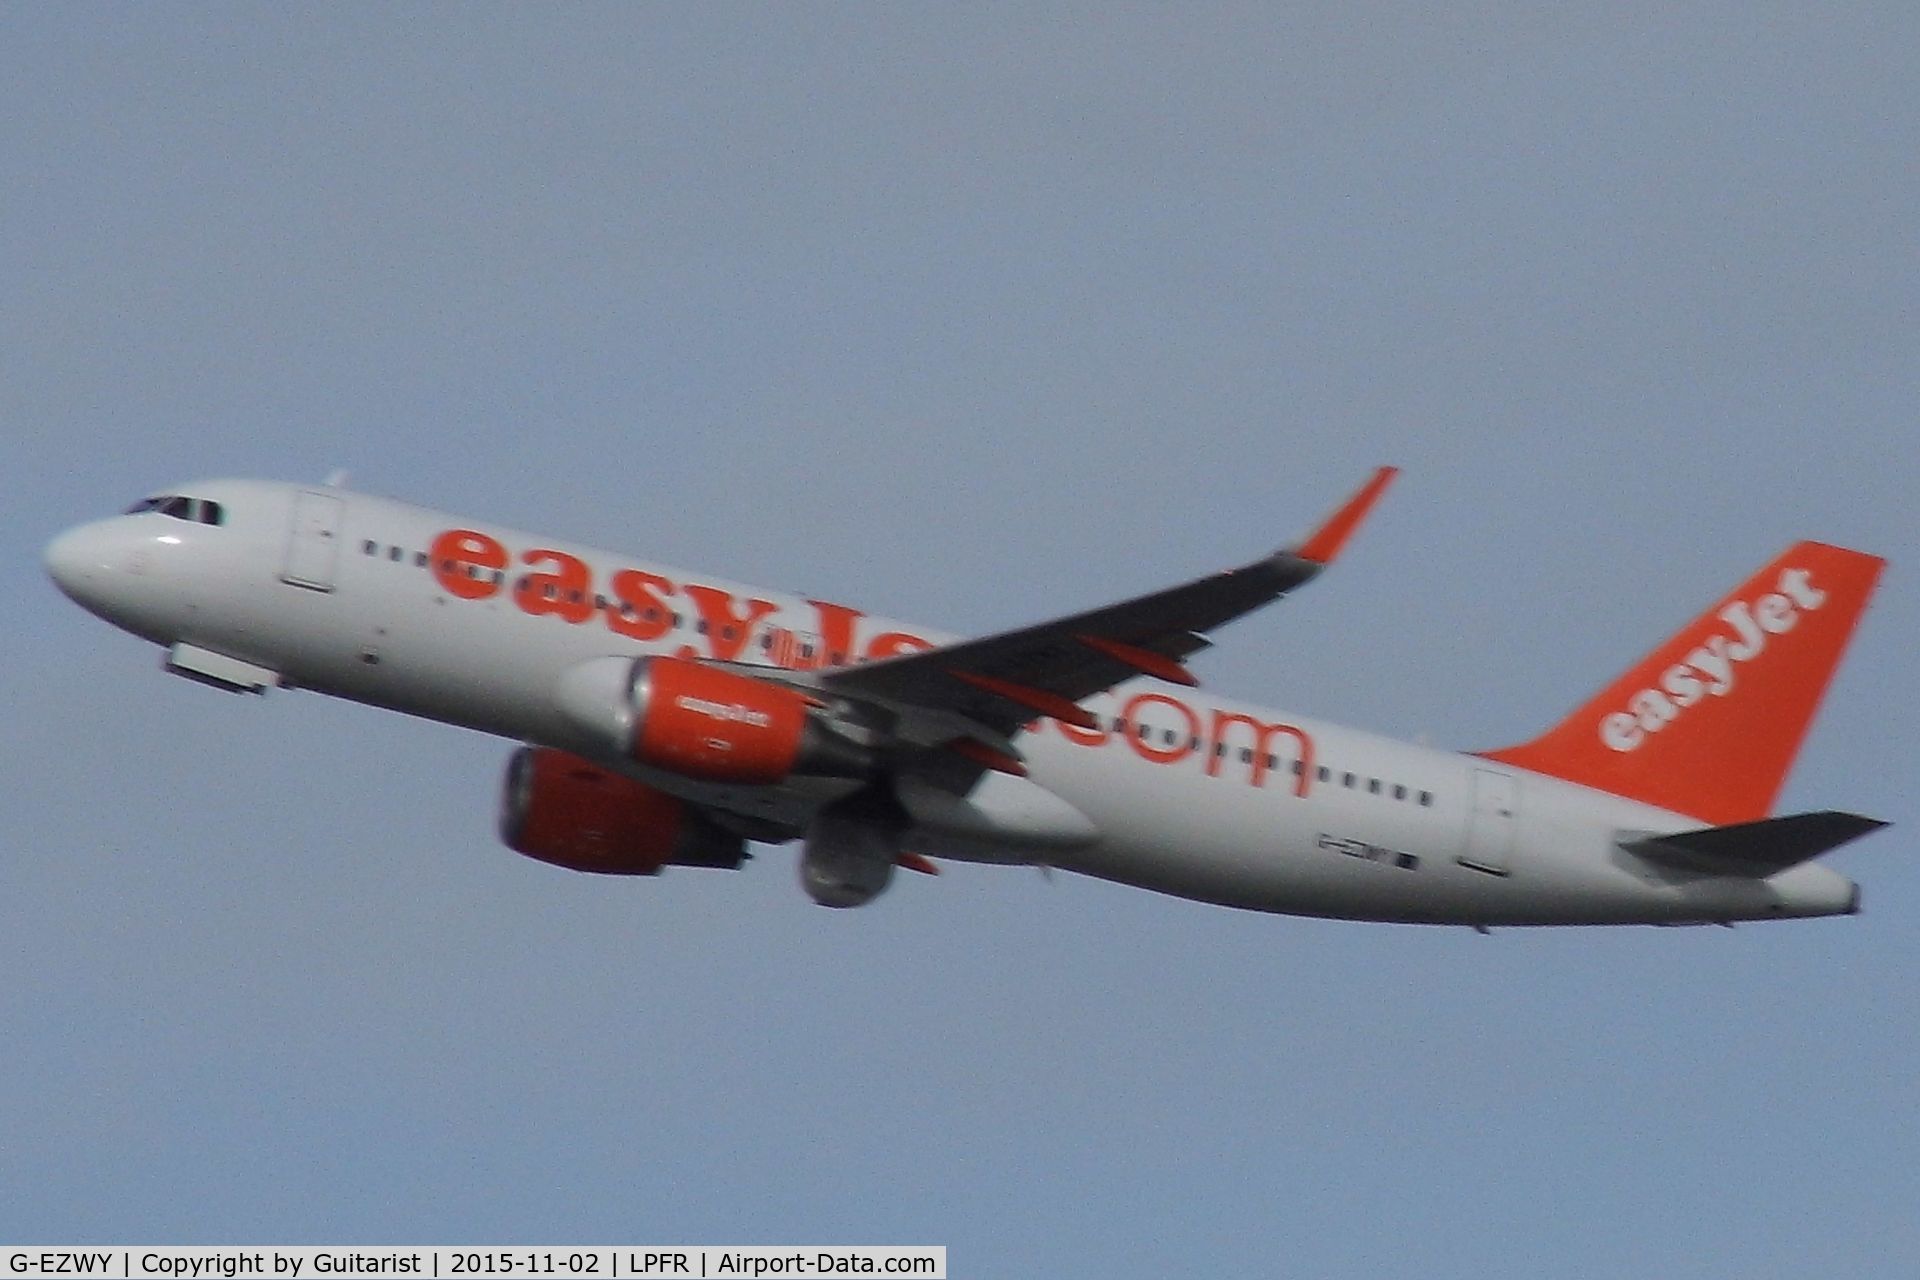 G-EZWY, 2014 Airbus A320-214 C/N 6267, At Faro